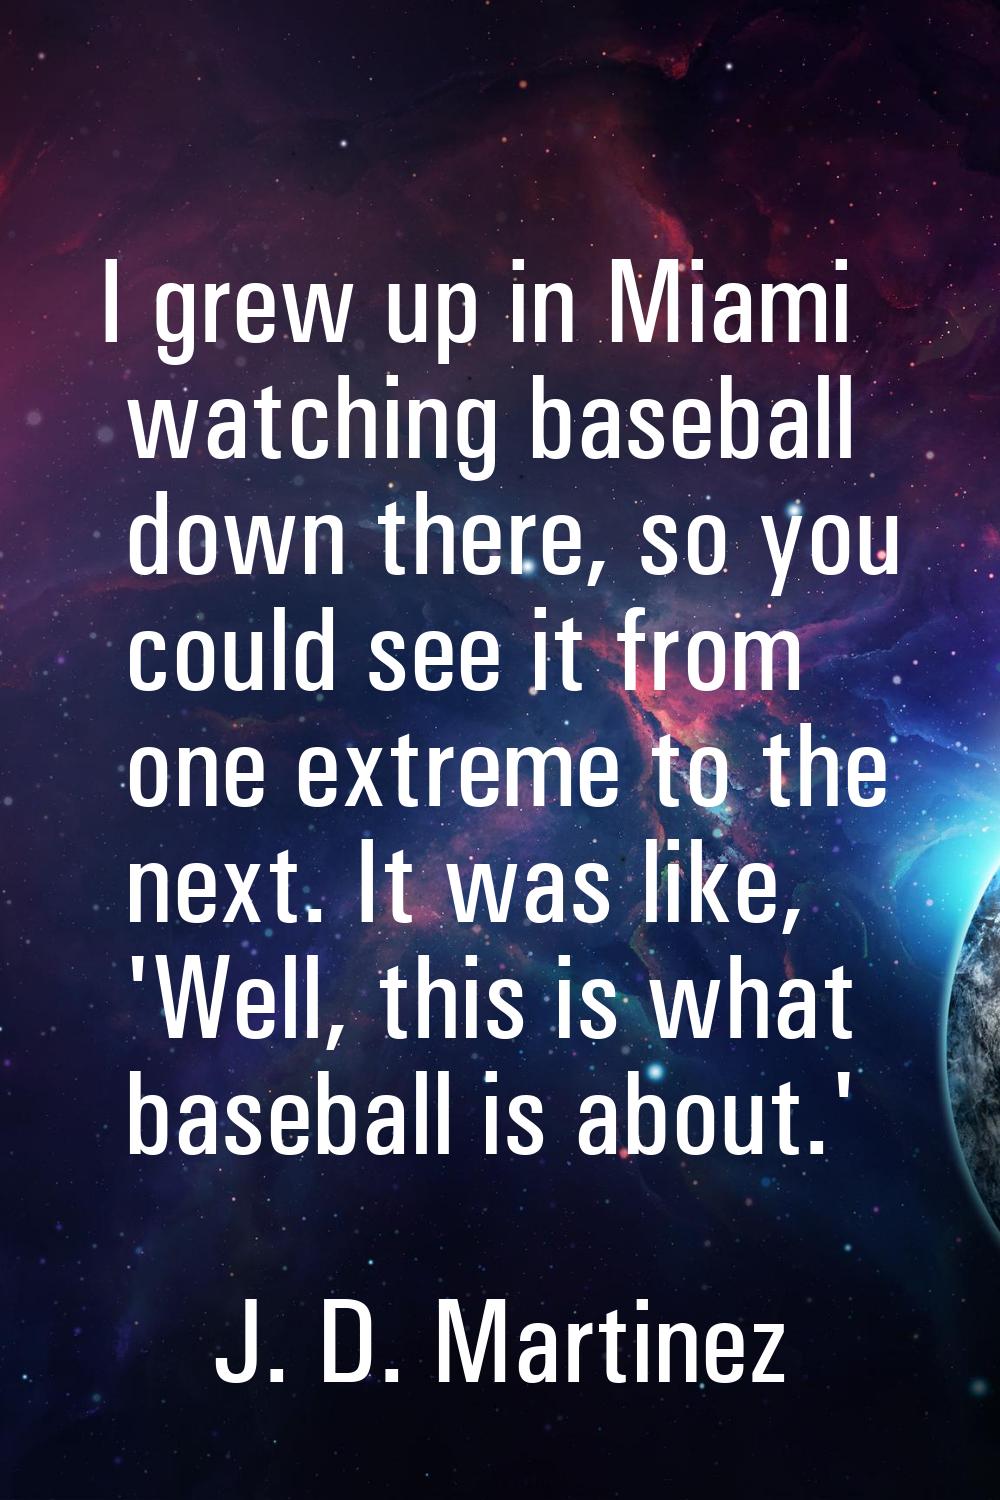 I grew up in Miami watching baseball down there, so you could see it from one extreme to the next. 